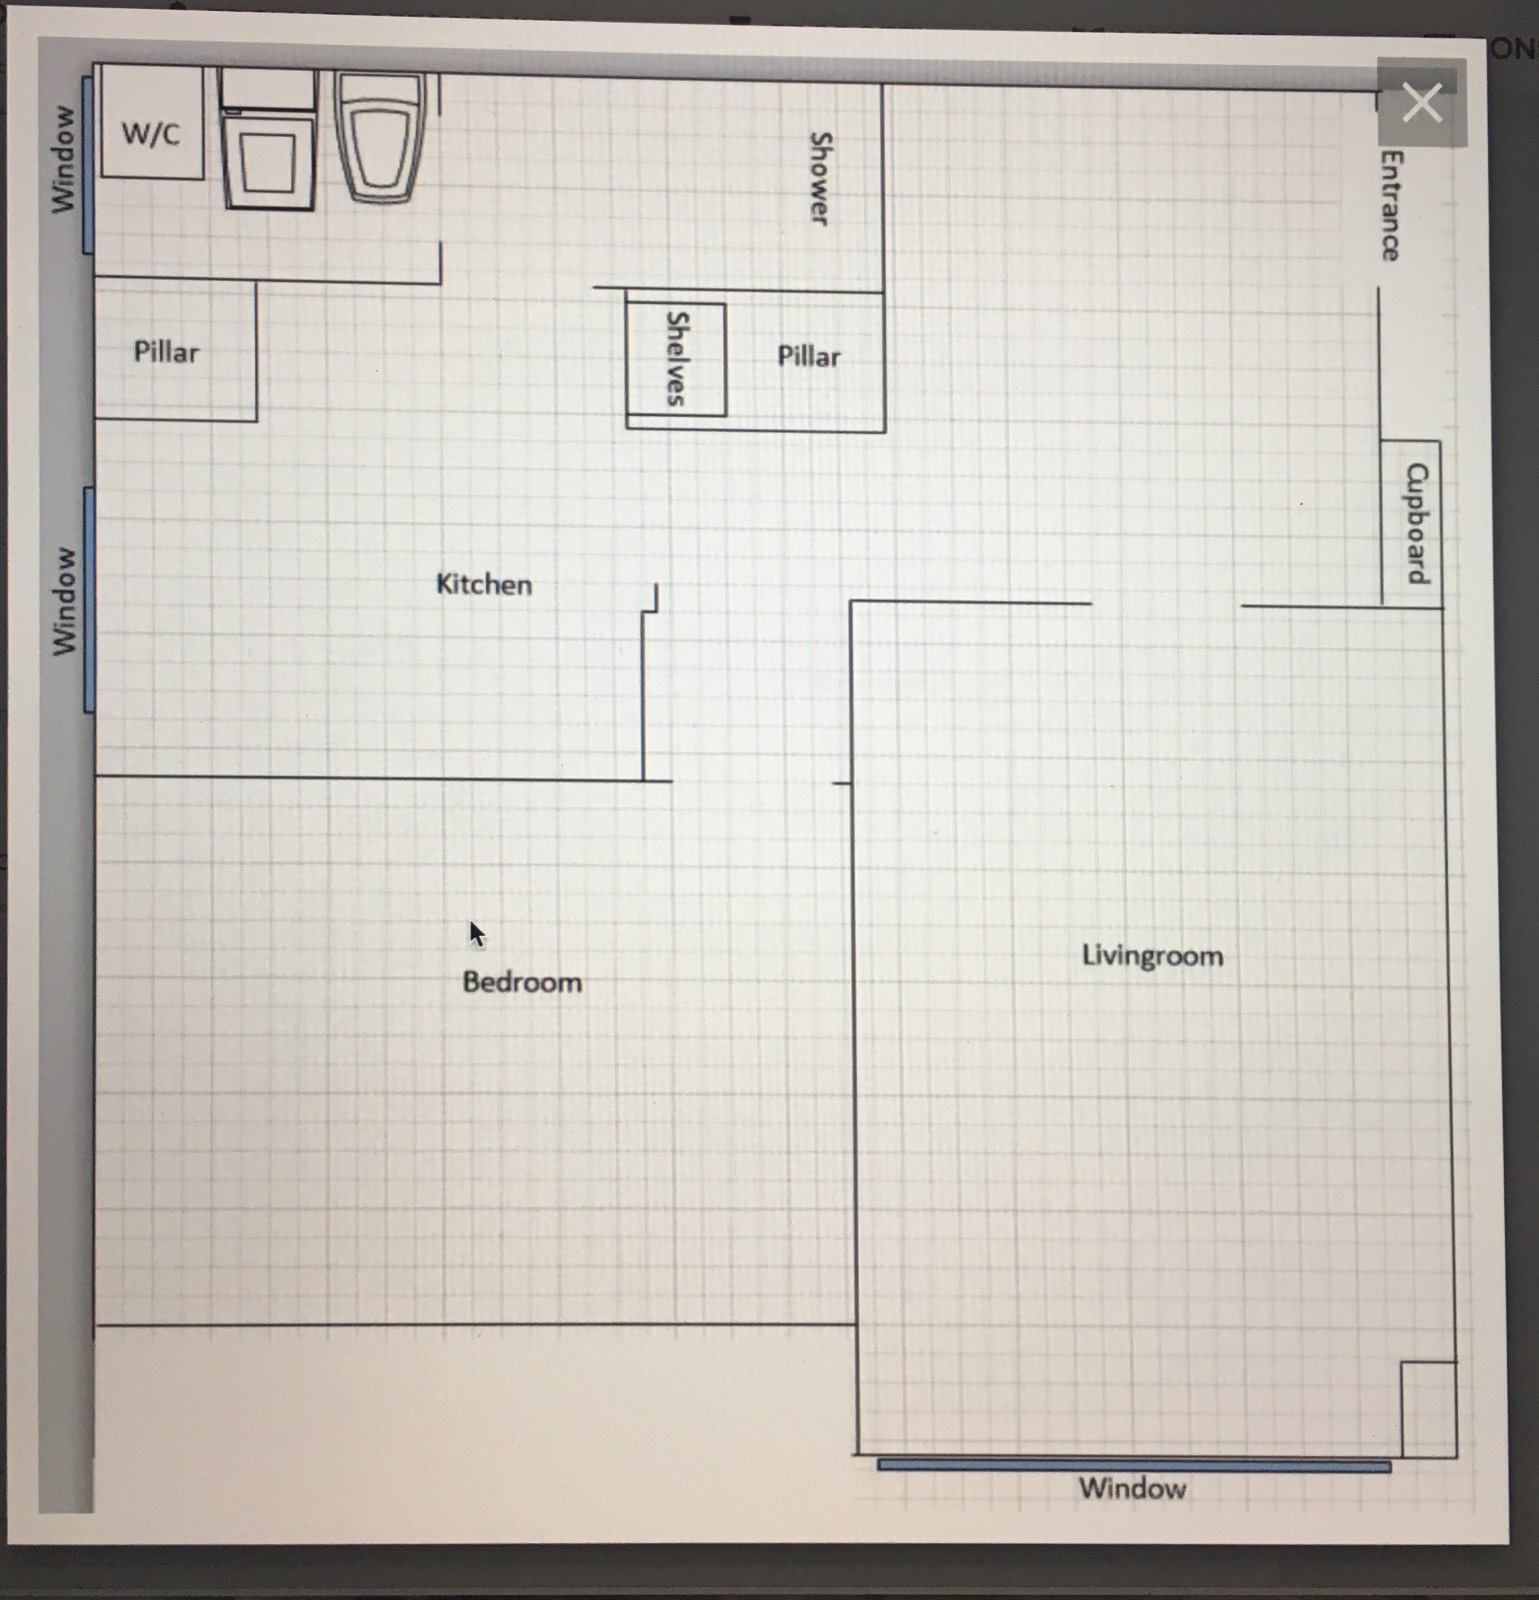 Need help configuring new layout!